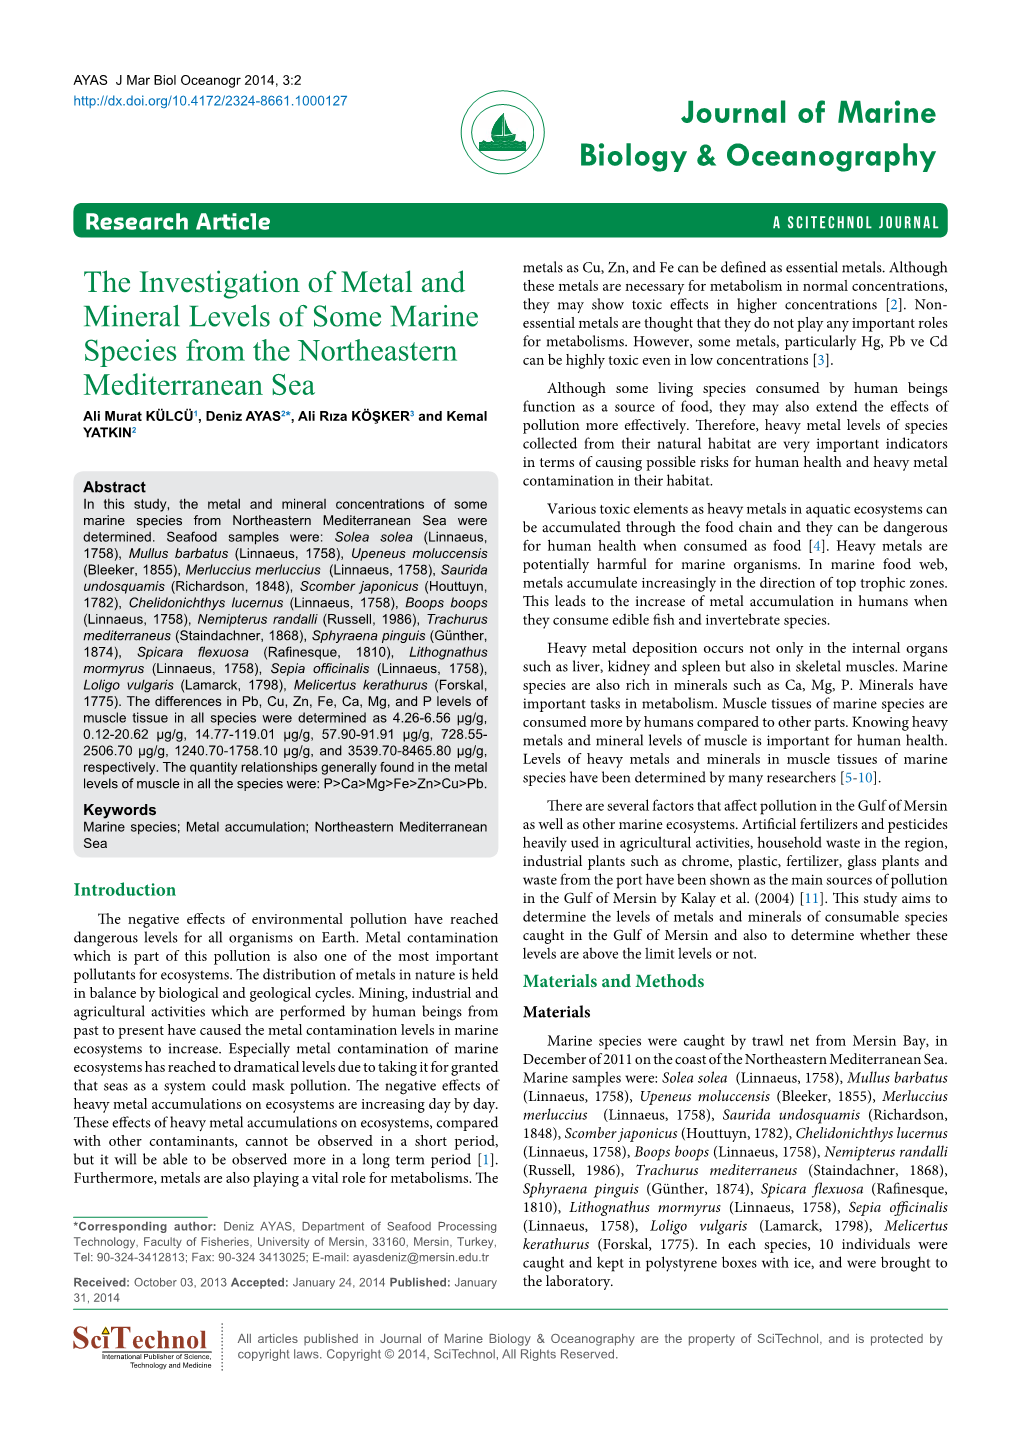 The Investigation of Metal and Mineral Levels of Some Marine Species from the Northeastern Mediterranean Sea